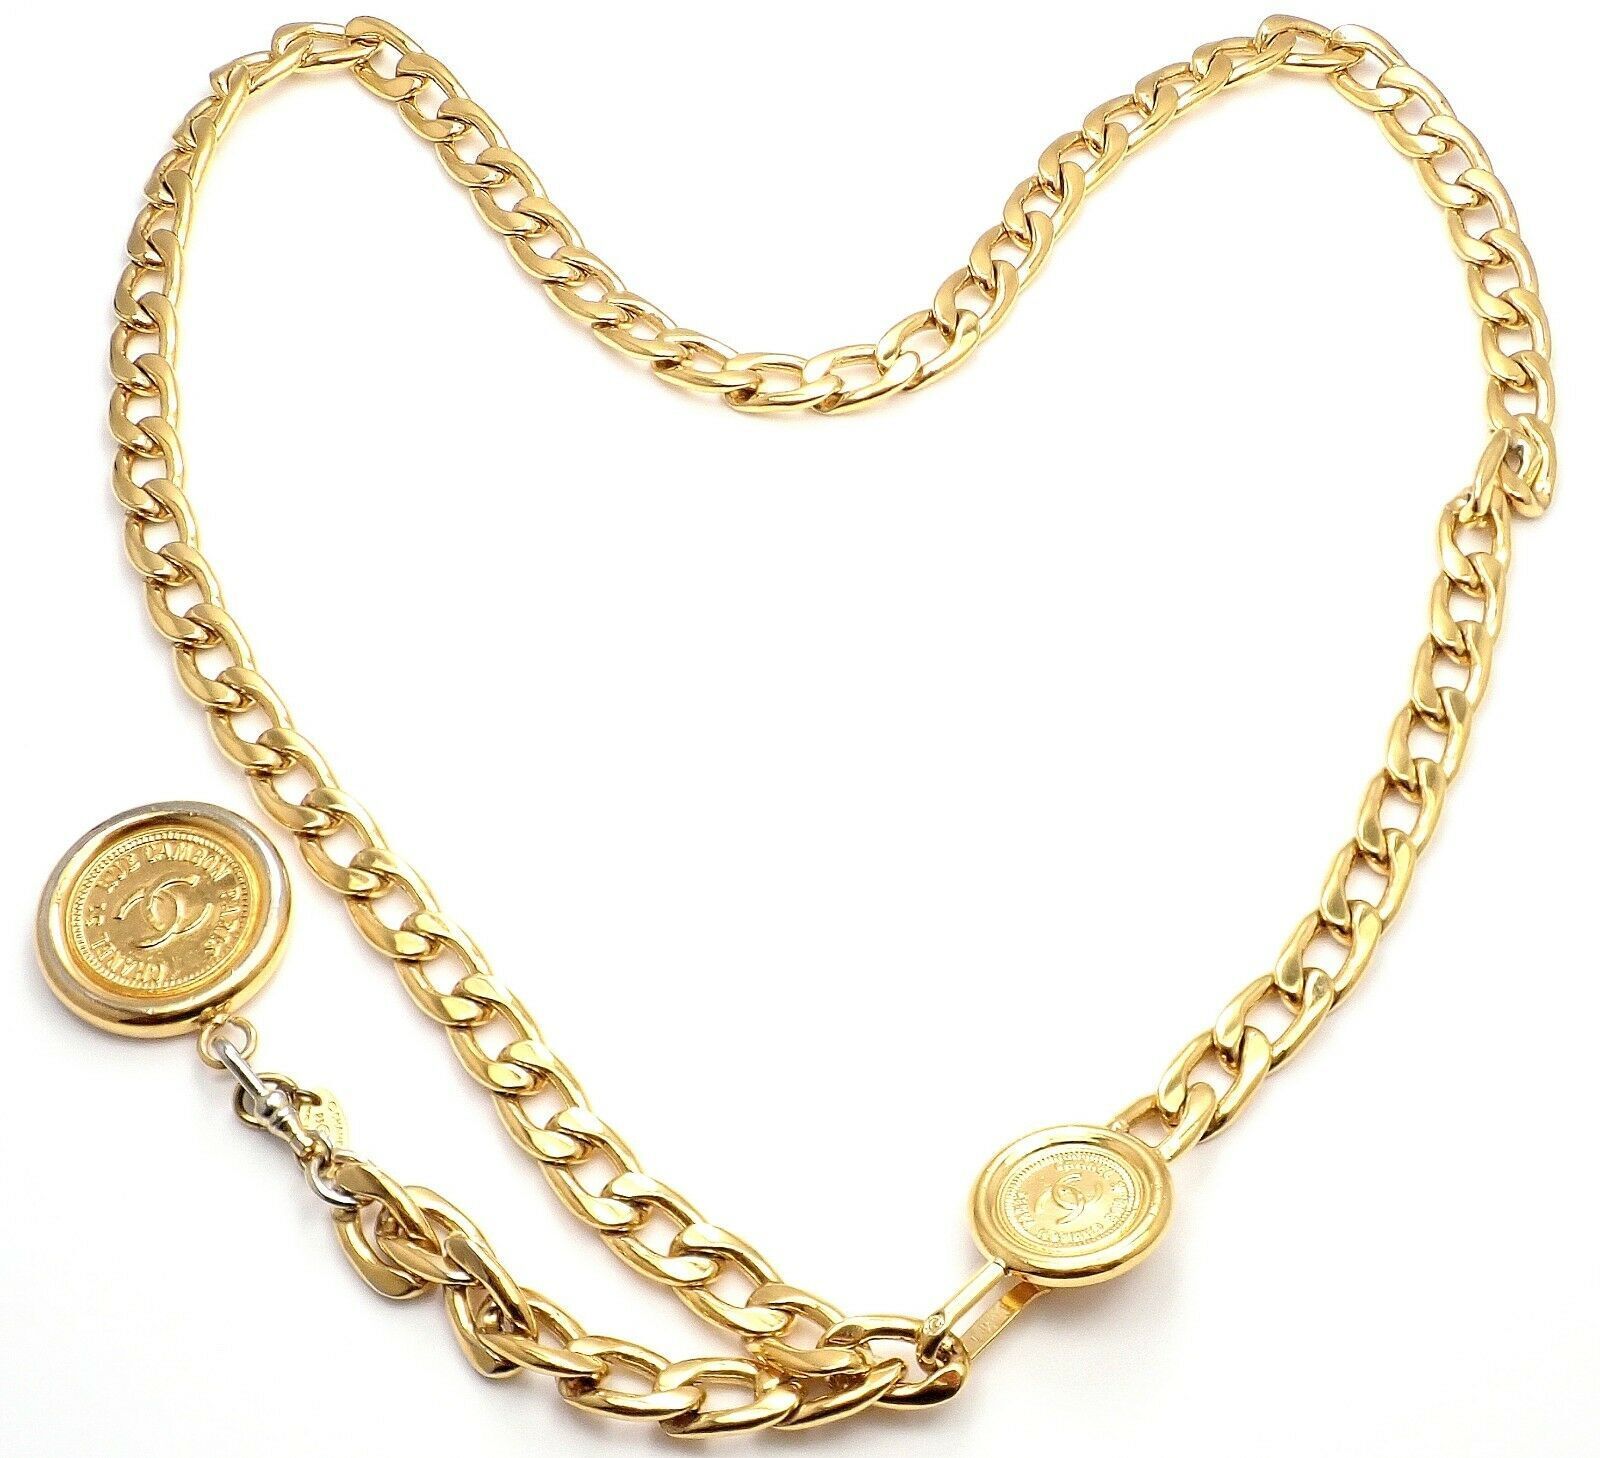 Chanel Jewelry & Watches:Fashion Jewelry:Necklaces & Pendants Amazing Authentic Chanel Gold Tone Draped Clasp Belt Necklace 34"